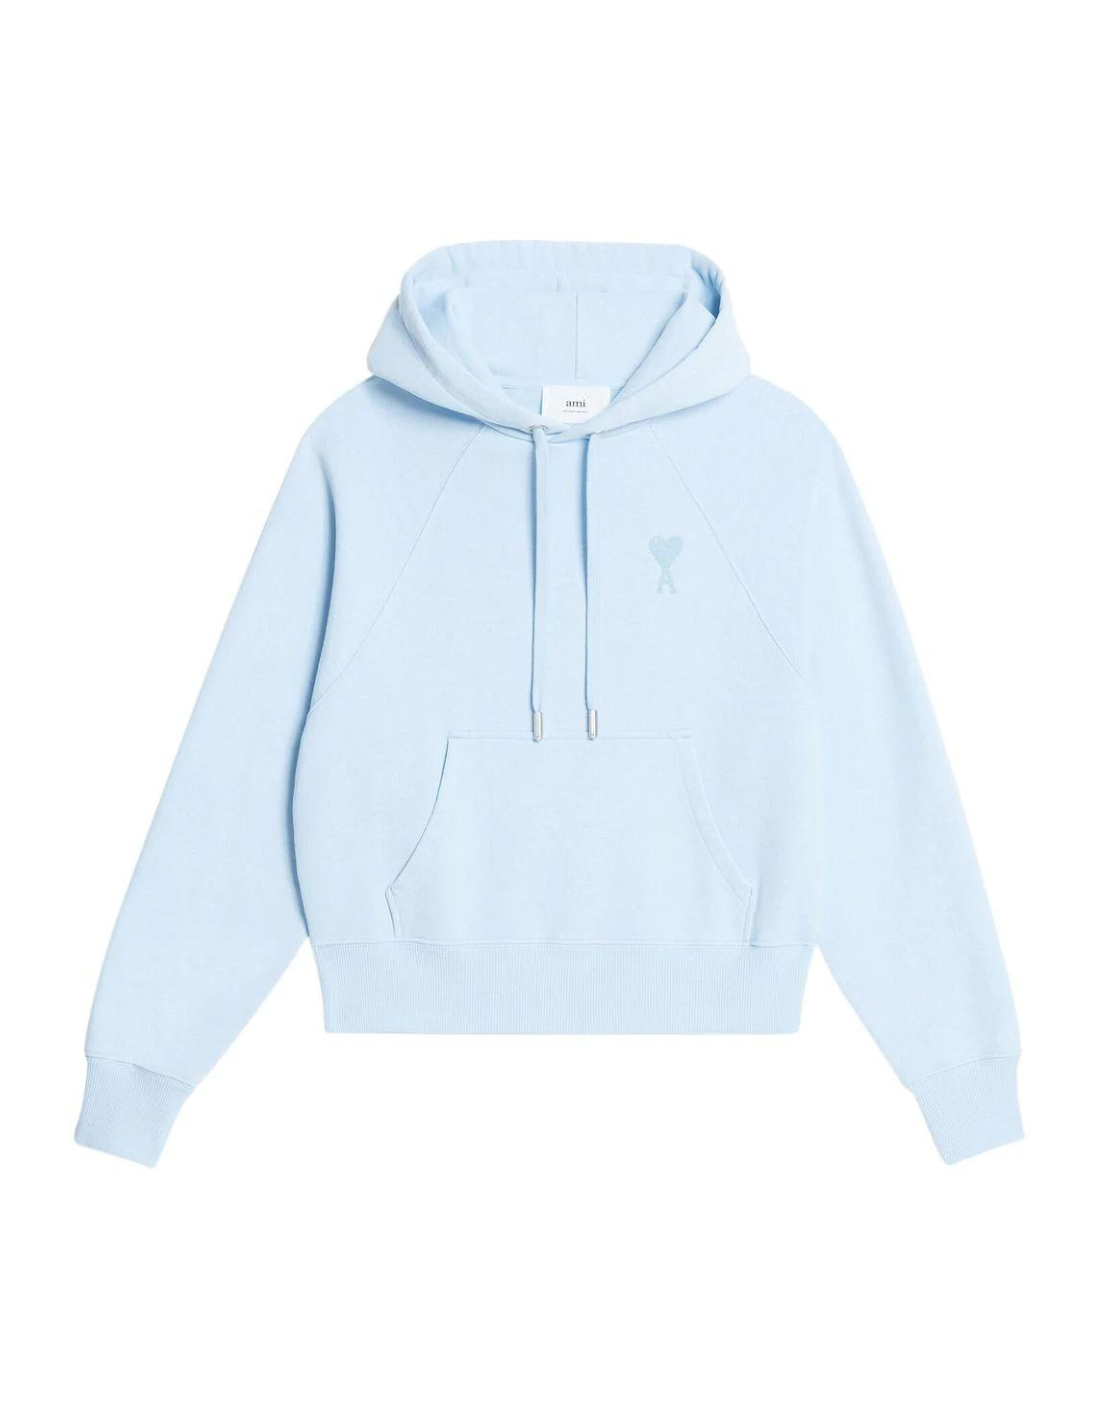 AMI PARIS tone-on-tone logo embroidered hoodie - baby blue